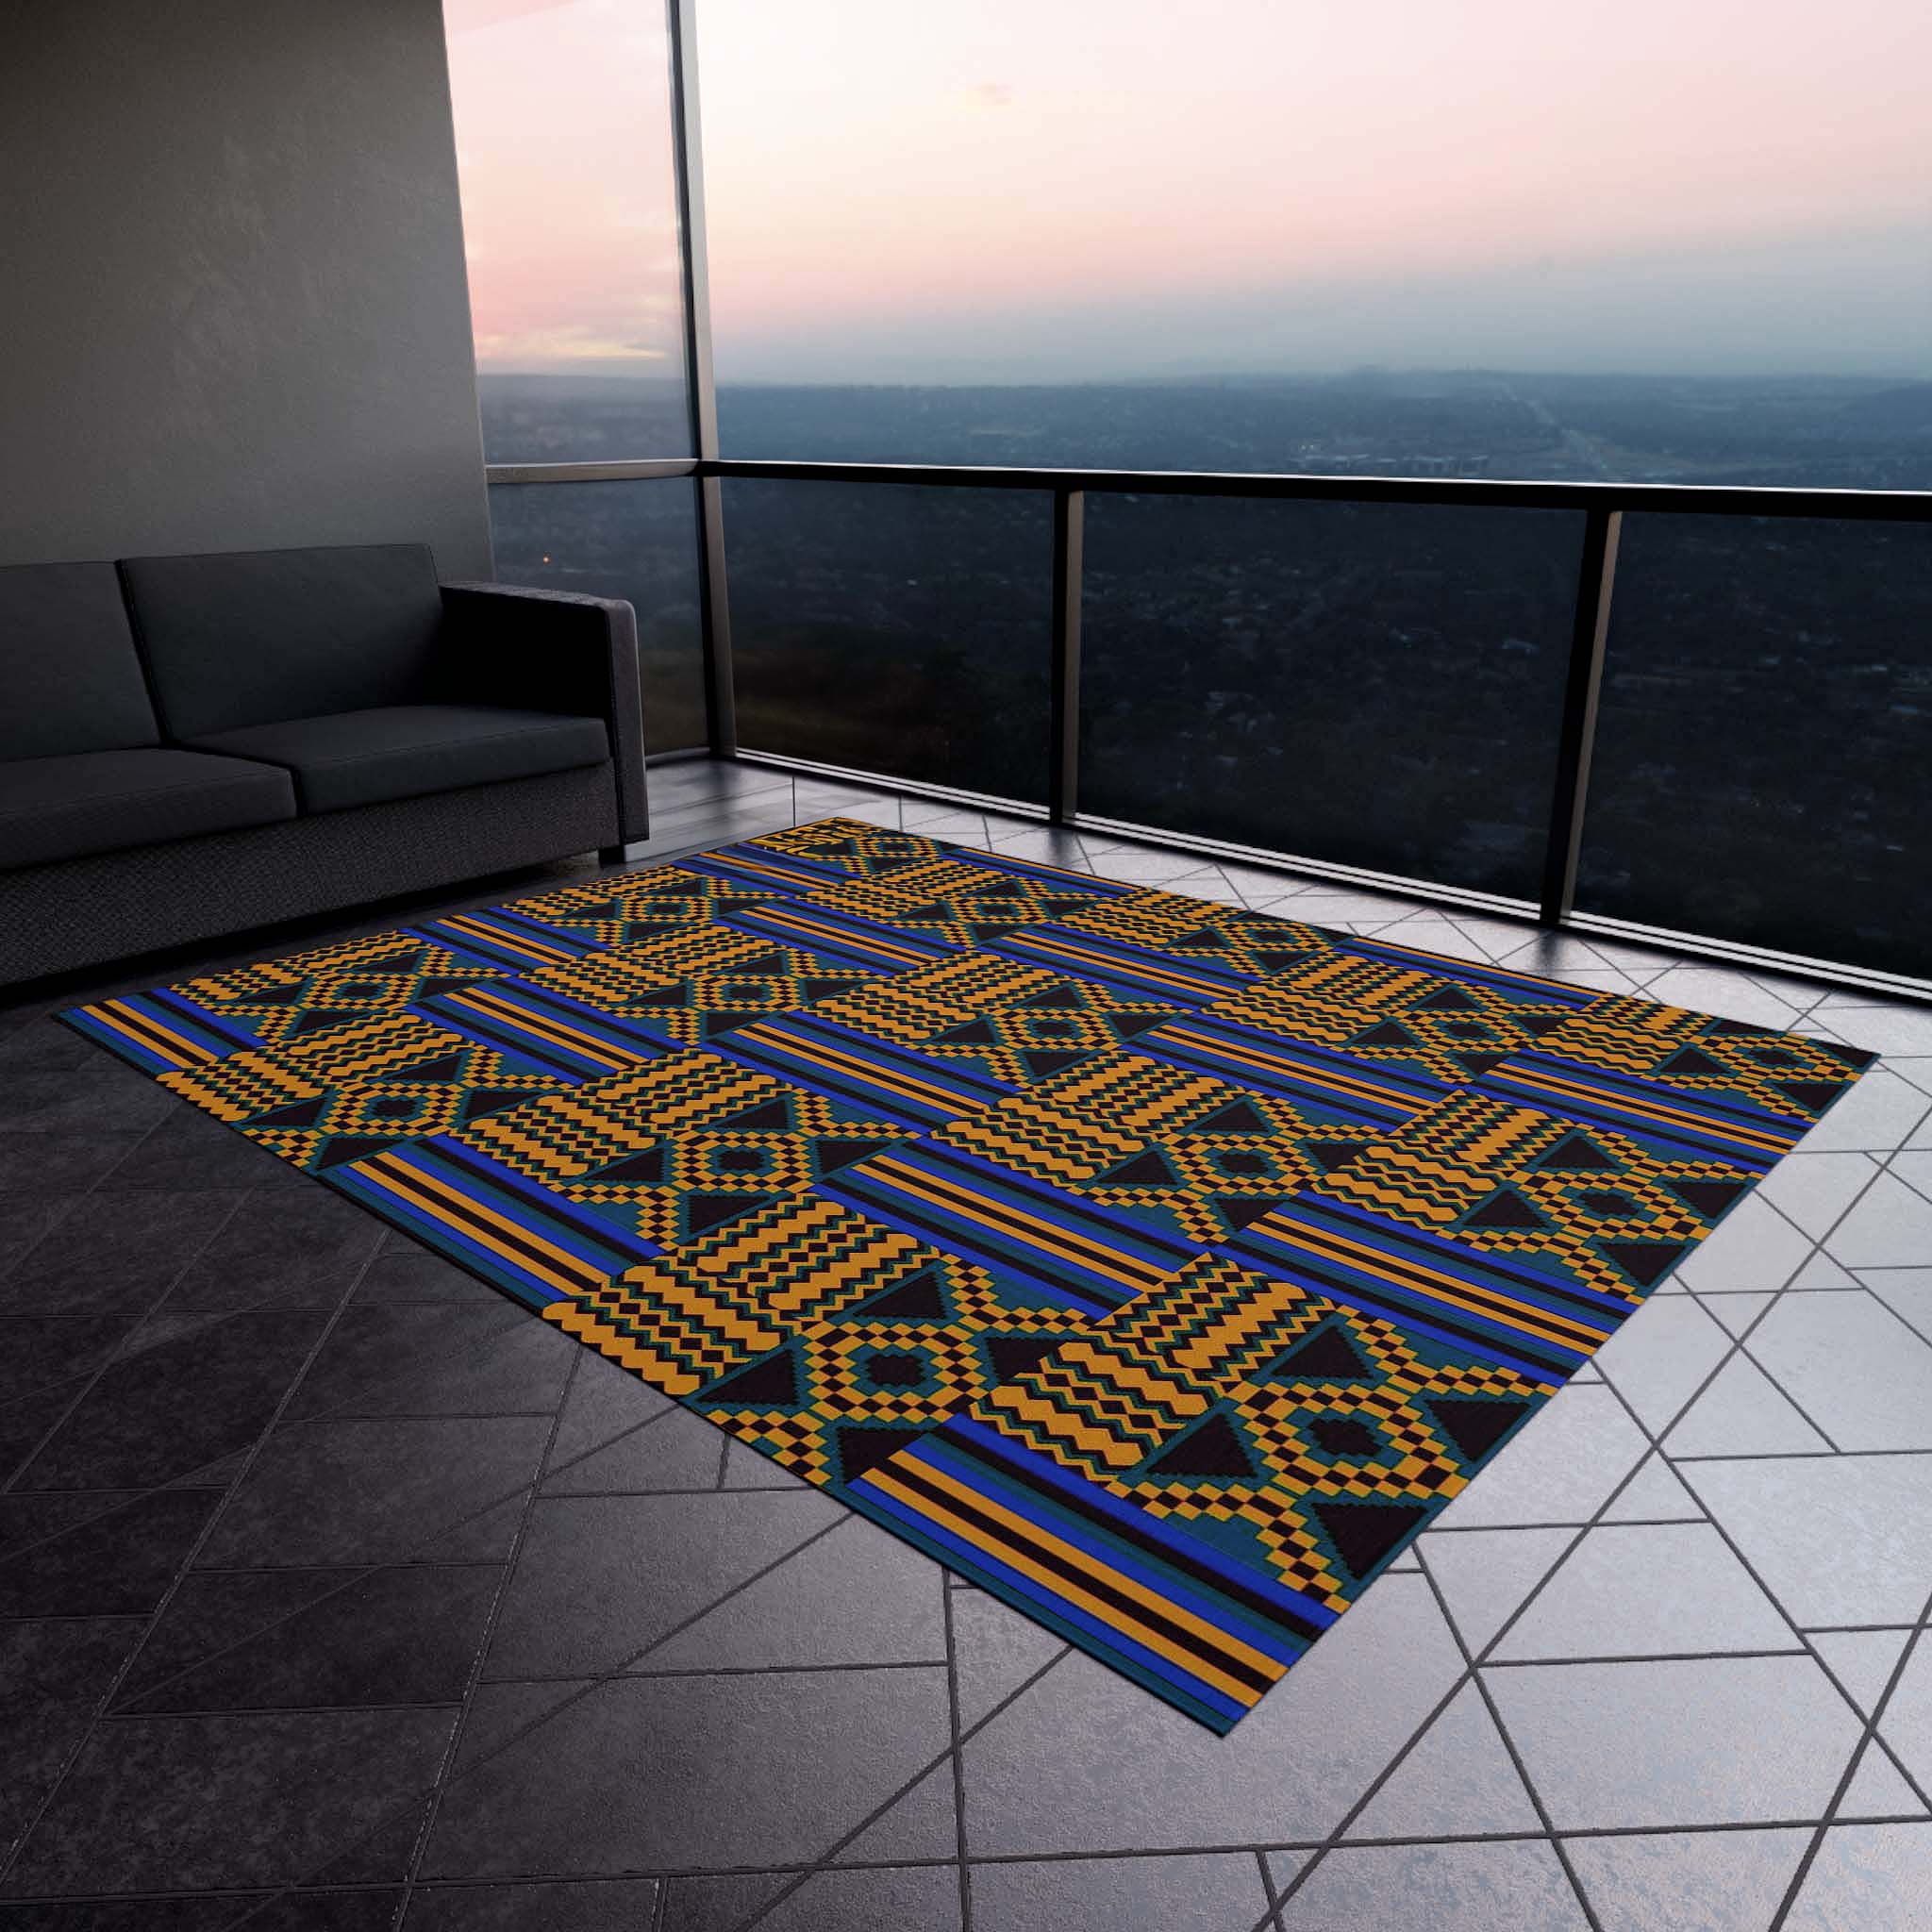 Outdoor African Area Rug Tribal Gold & Blue Carpet - Bynelo